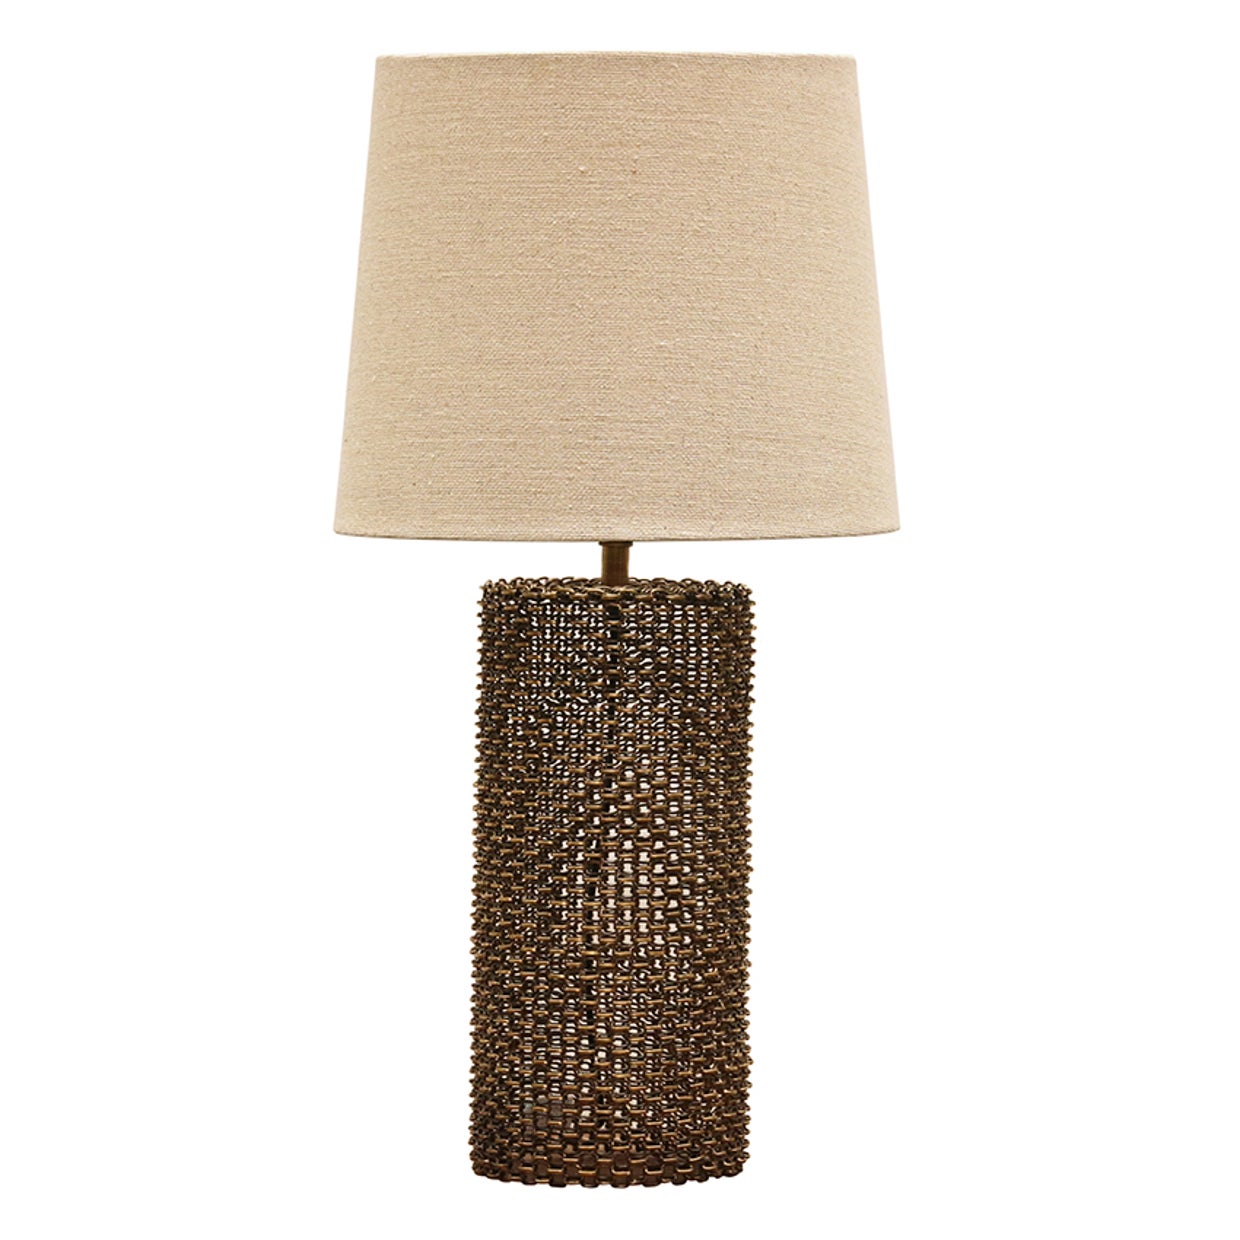 Woven Metal Lamp with Shade in Antique Brass Finish